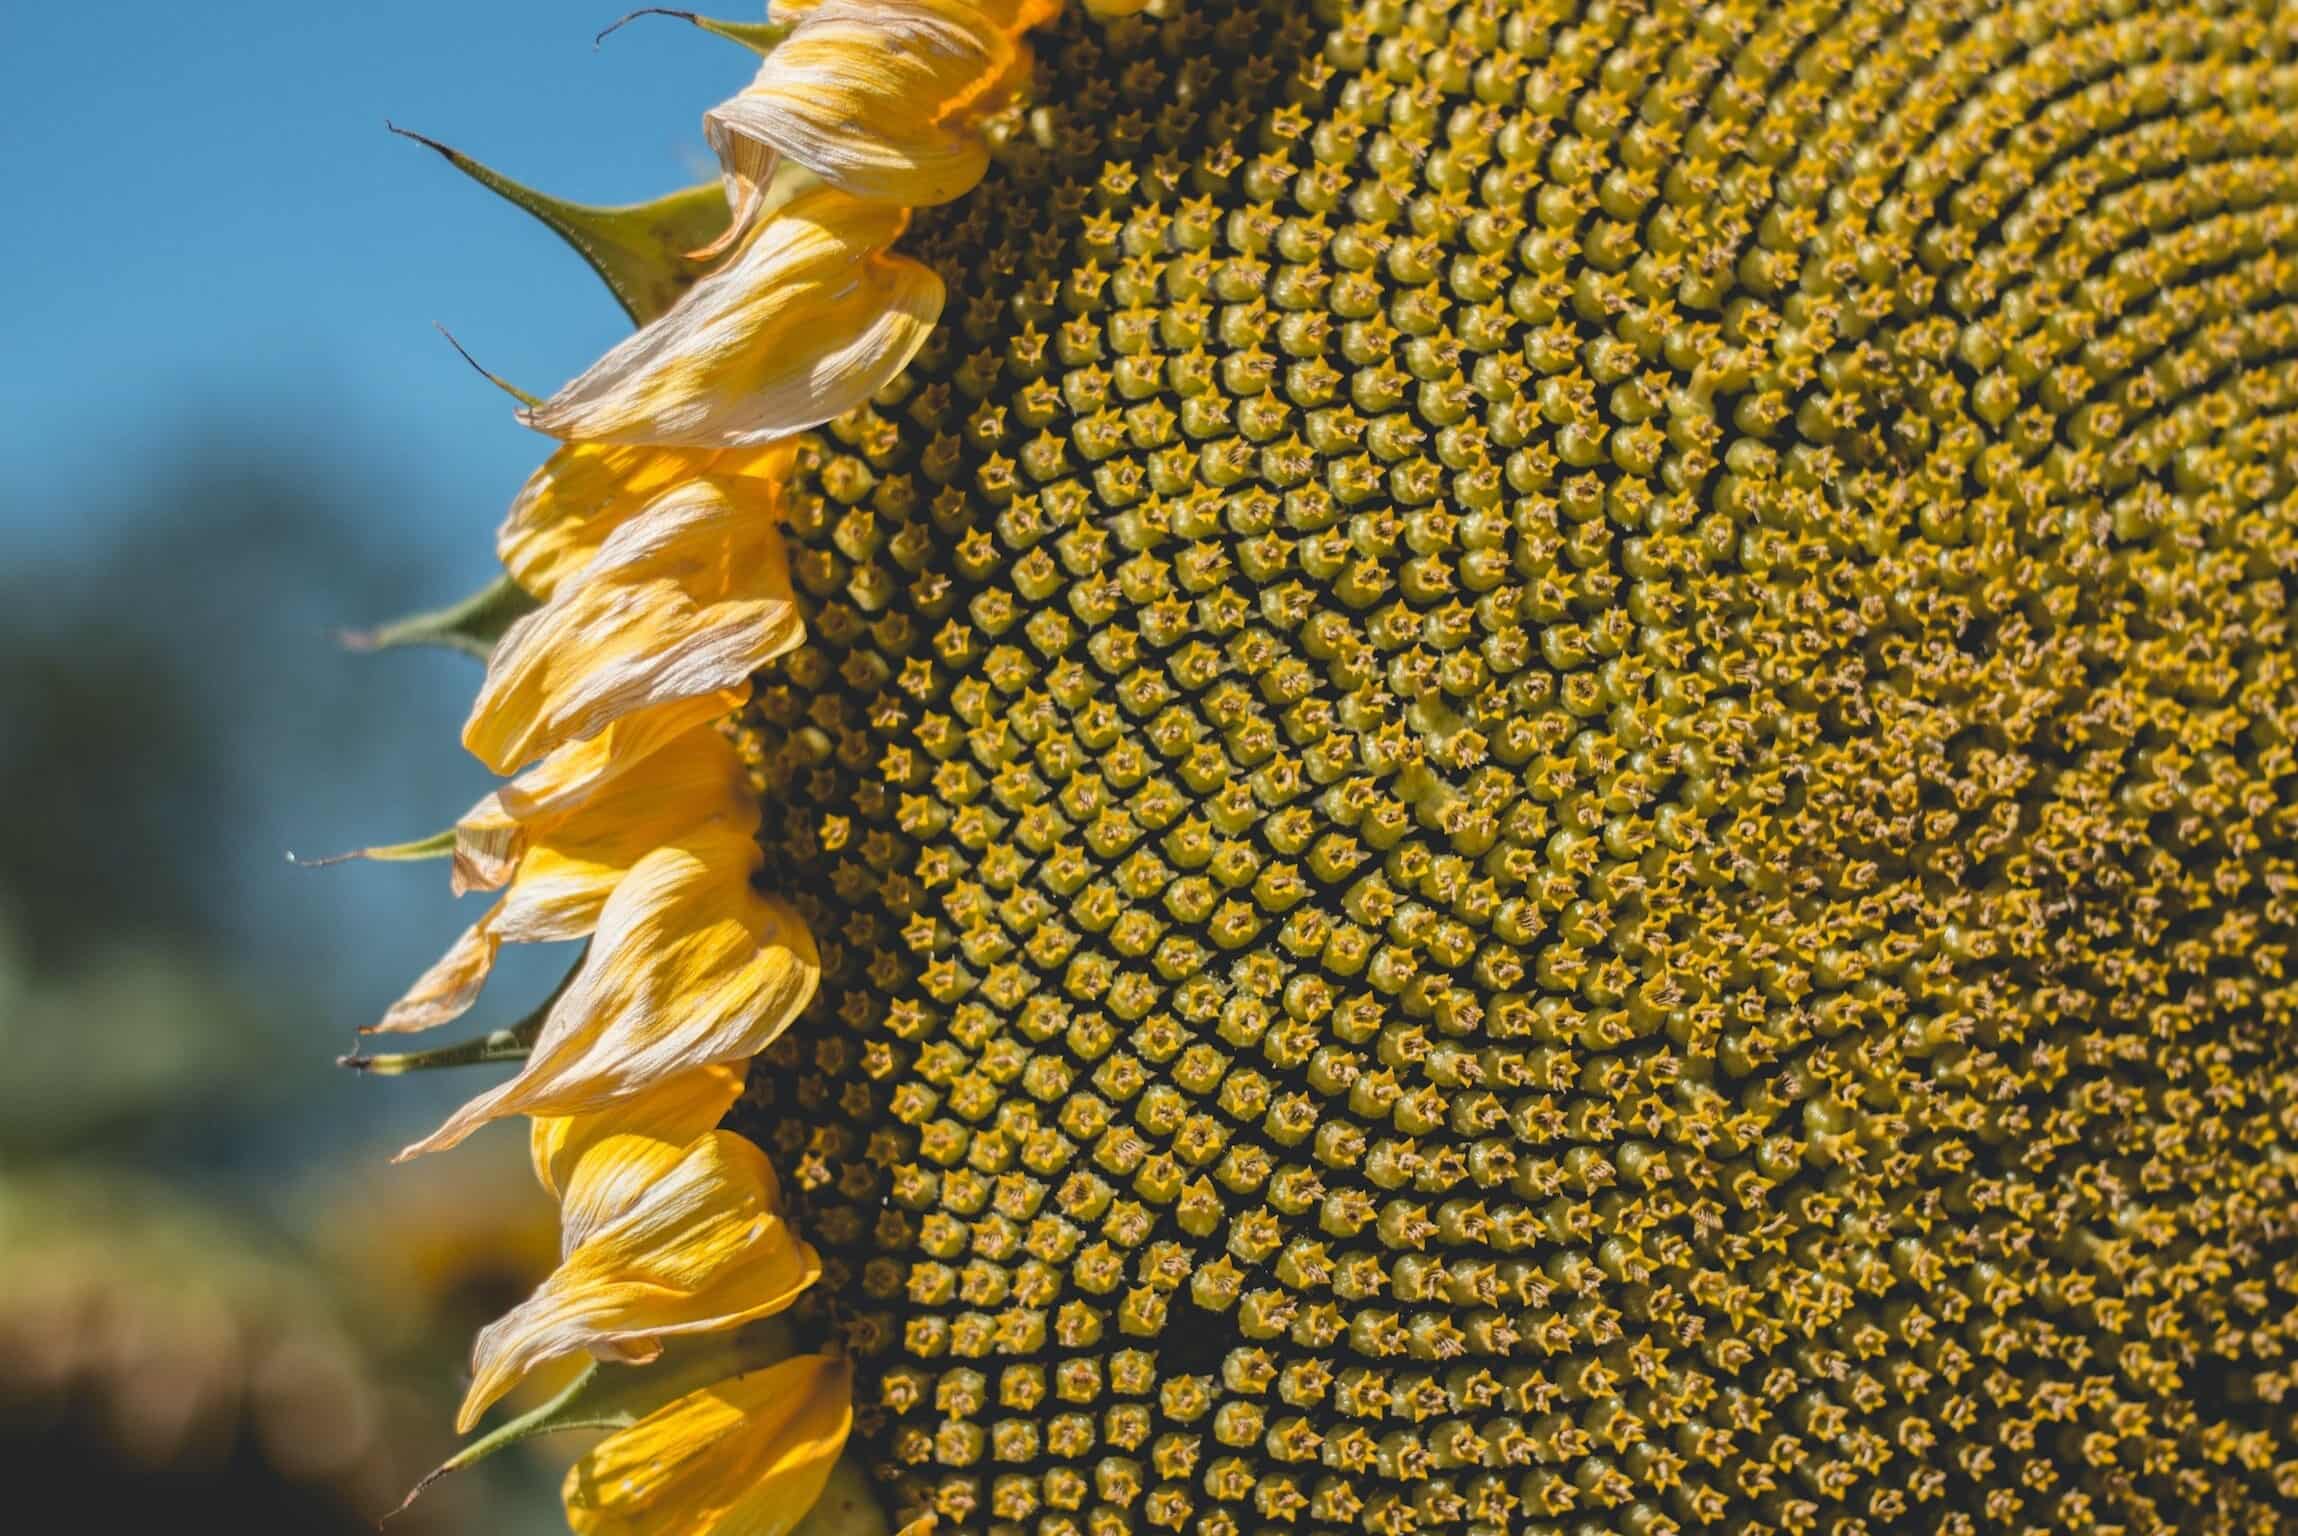 Where Do Sunflower Seeds Come From